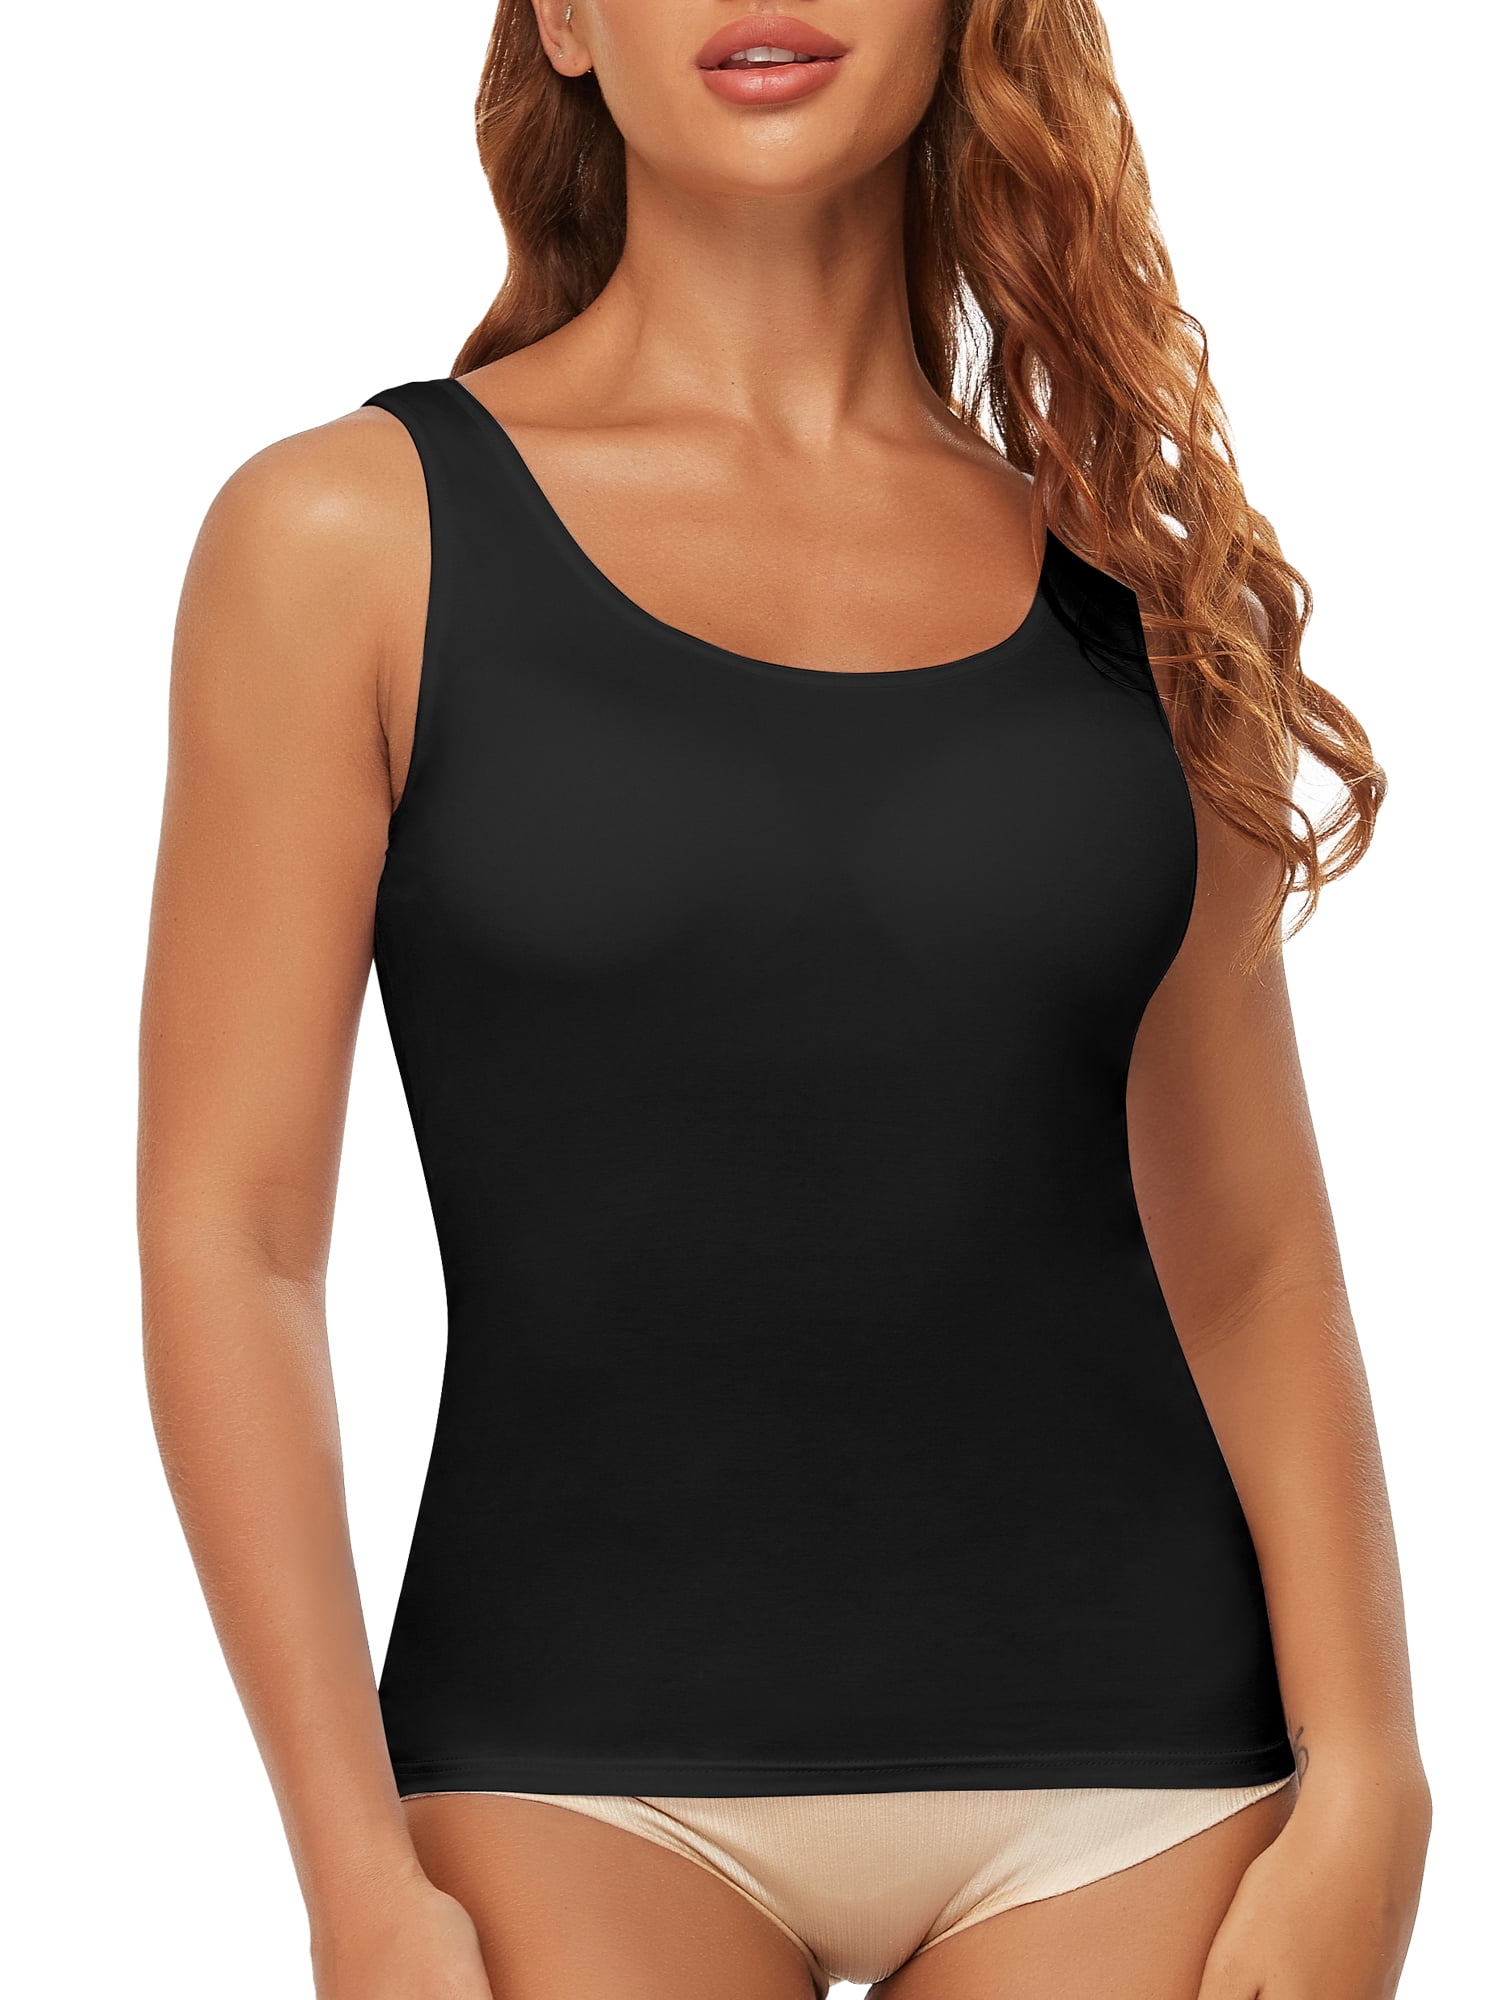 Women's Camisole with Built in Bra Tank Tops for Layering Stretch Casual  Undershirts Wider Strap